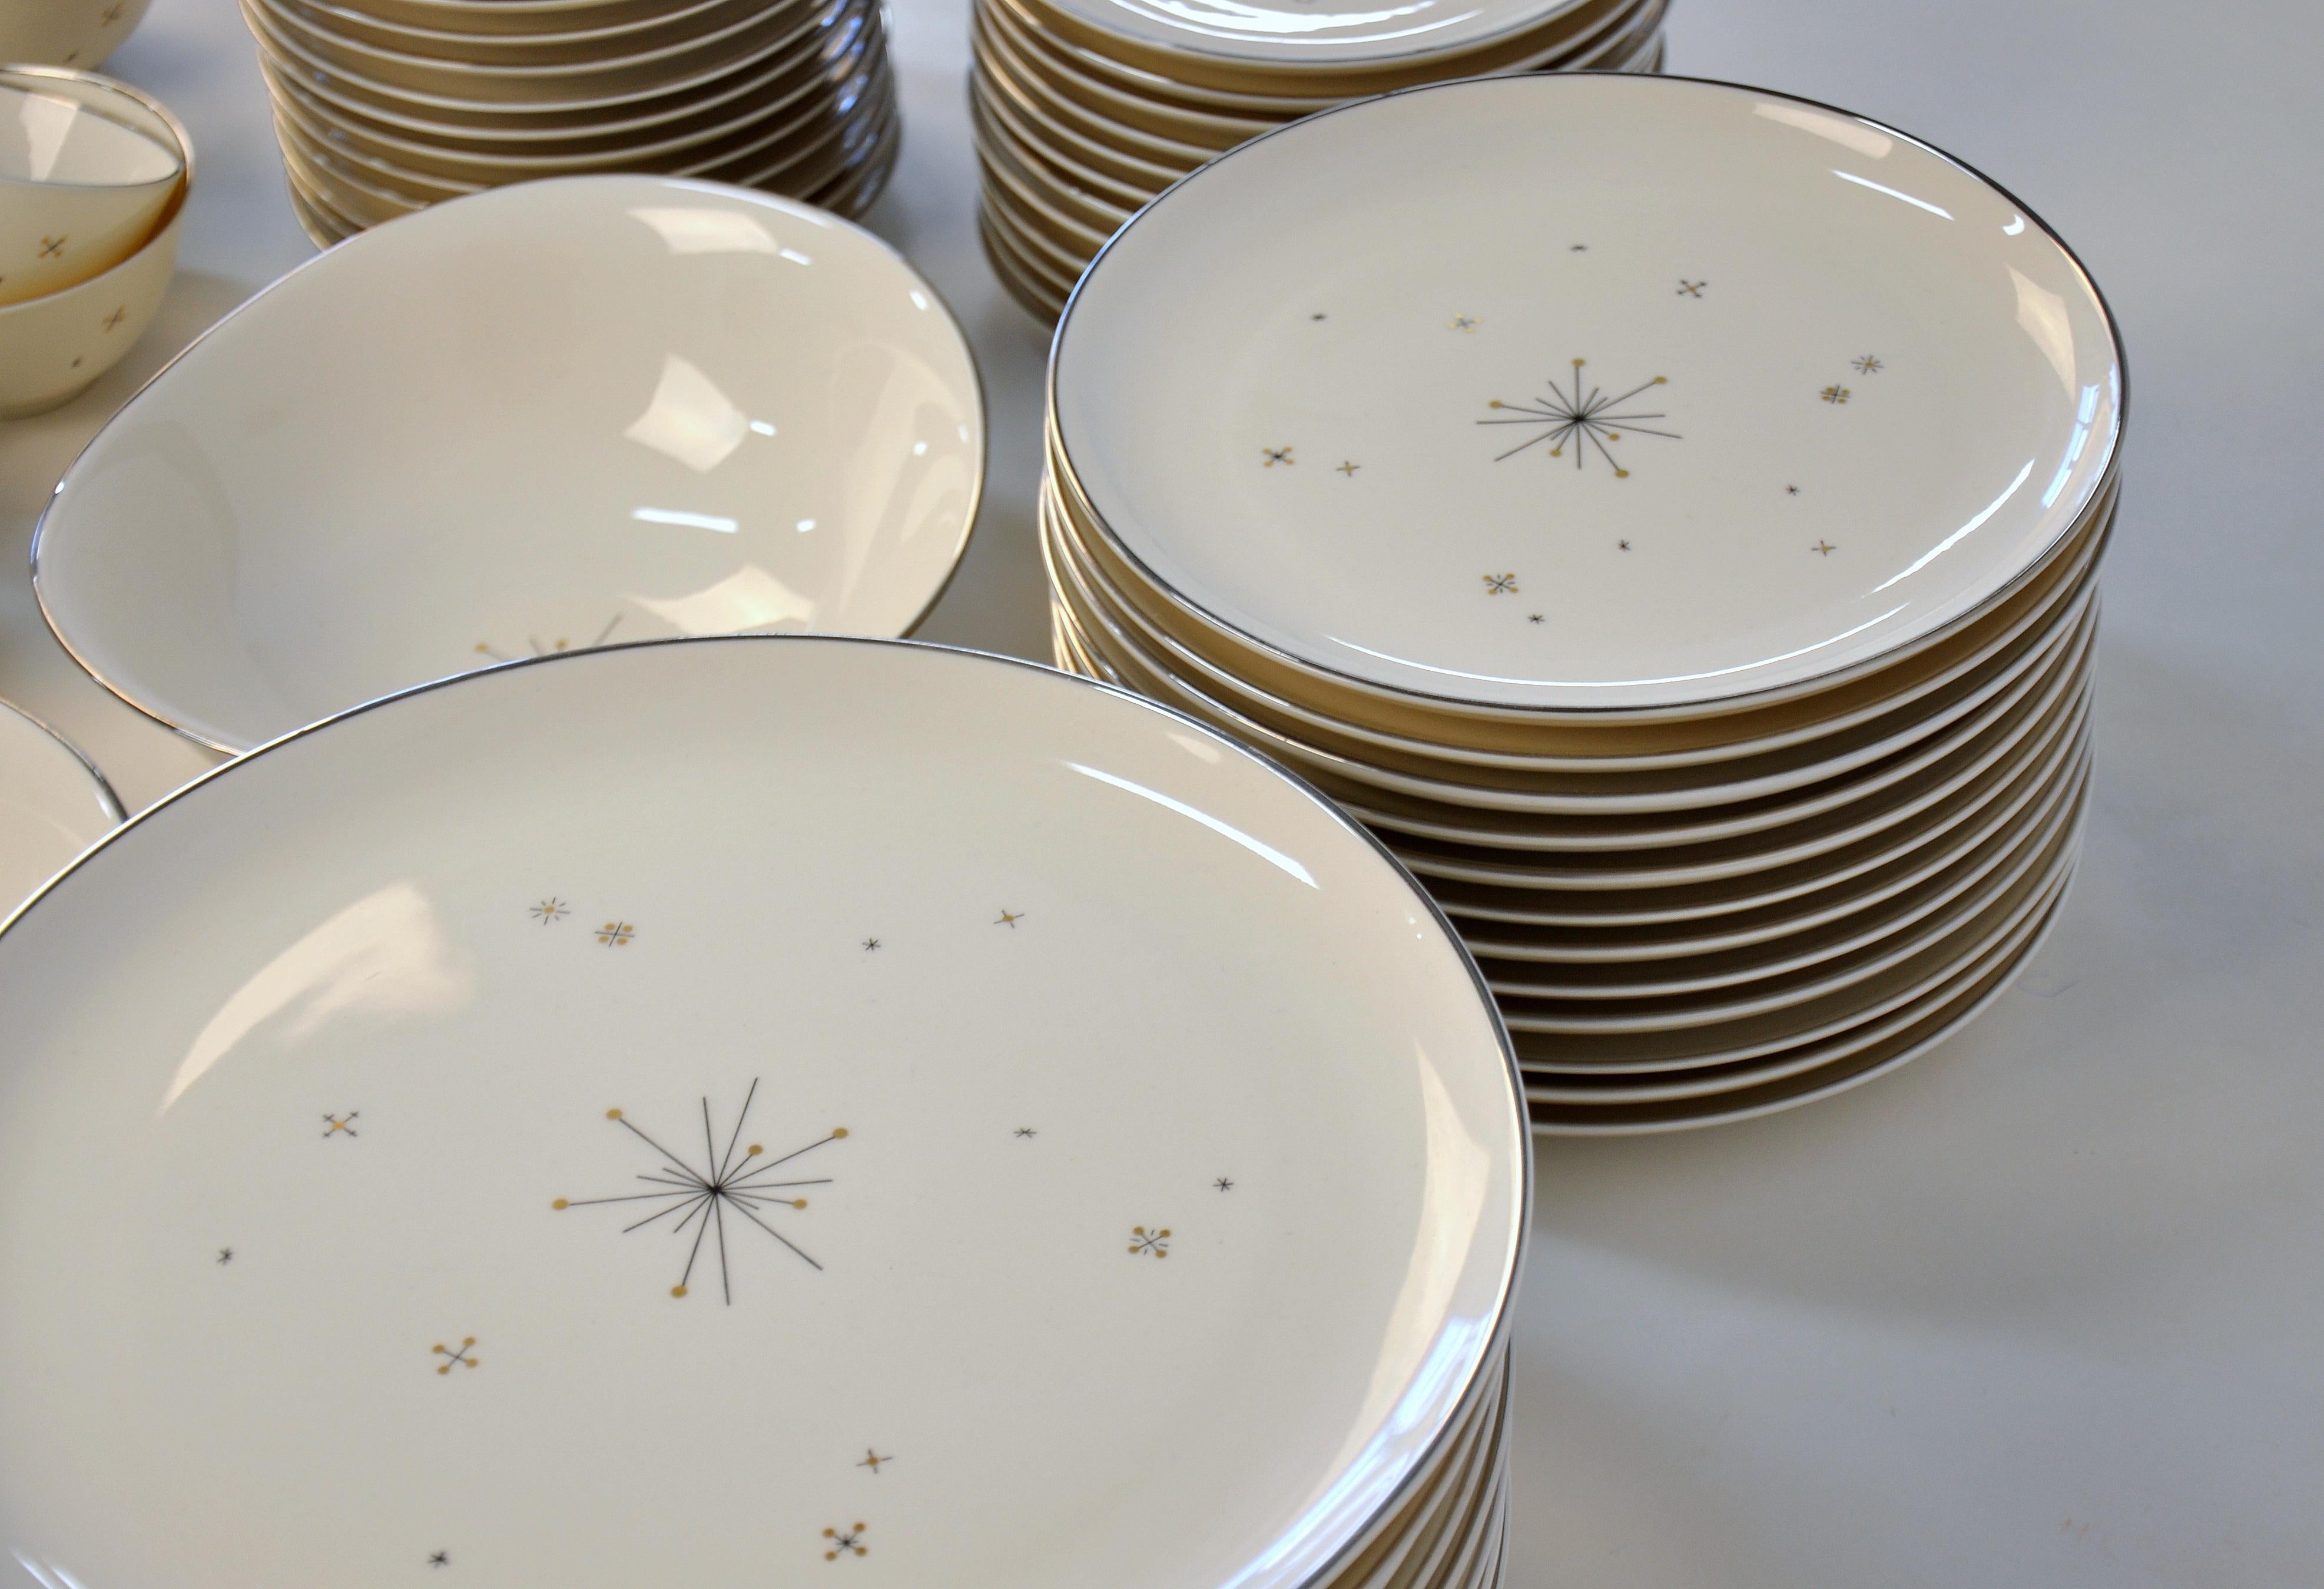 Fabulous midcentury atomic 12 person dinnerware dish set in the Evening Star pattern by Syracuse China, dating from the late 1950s-early 1960s. Featuring black and gold stars on an ivory / cream / off-white background, with silver / platinum rims.